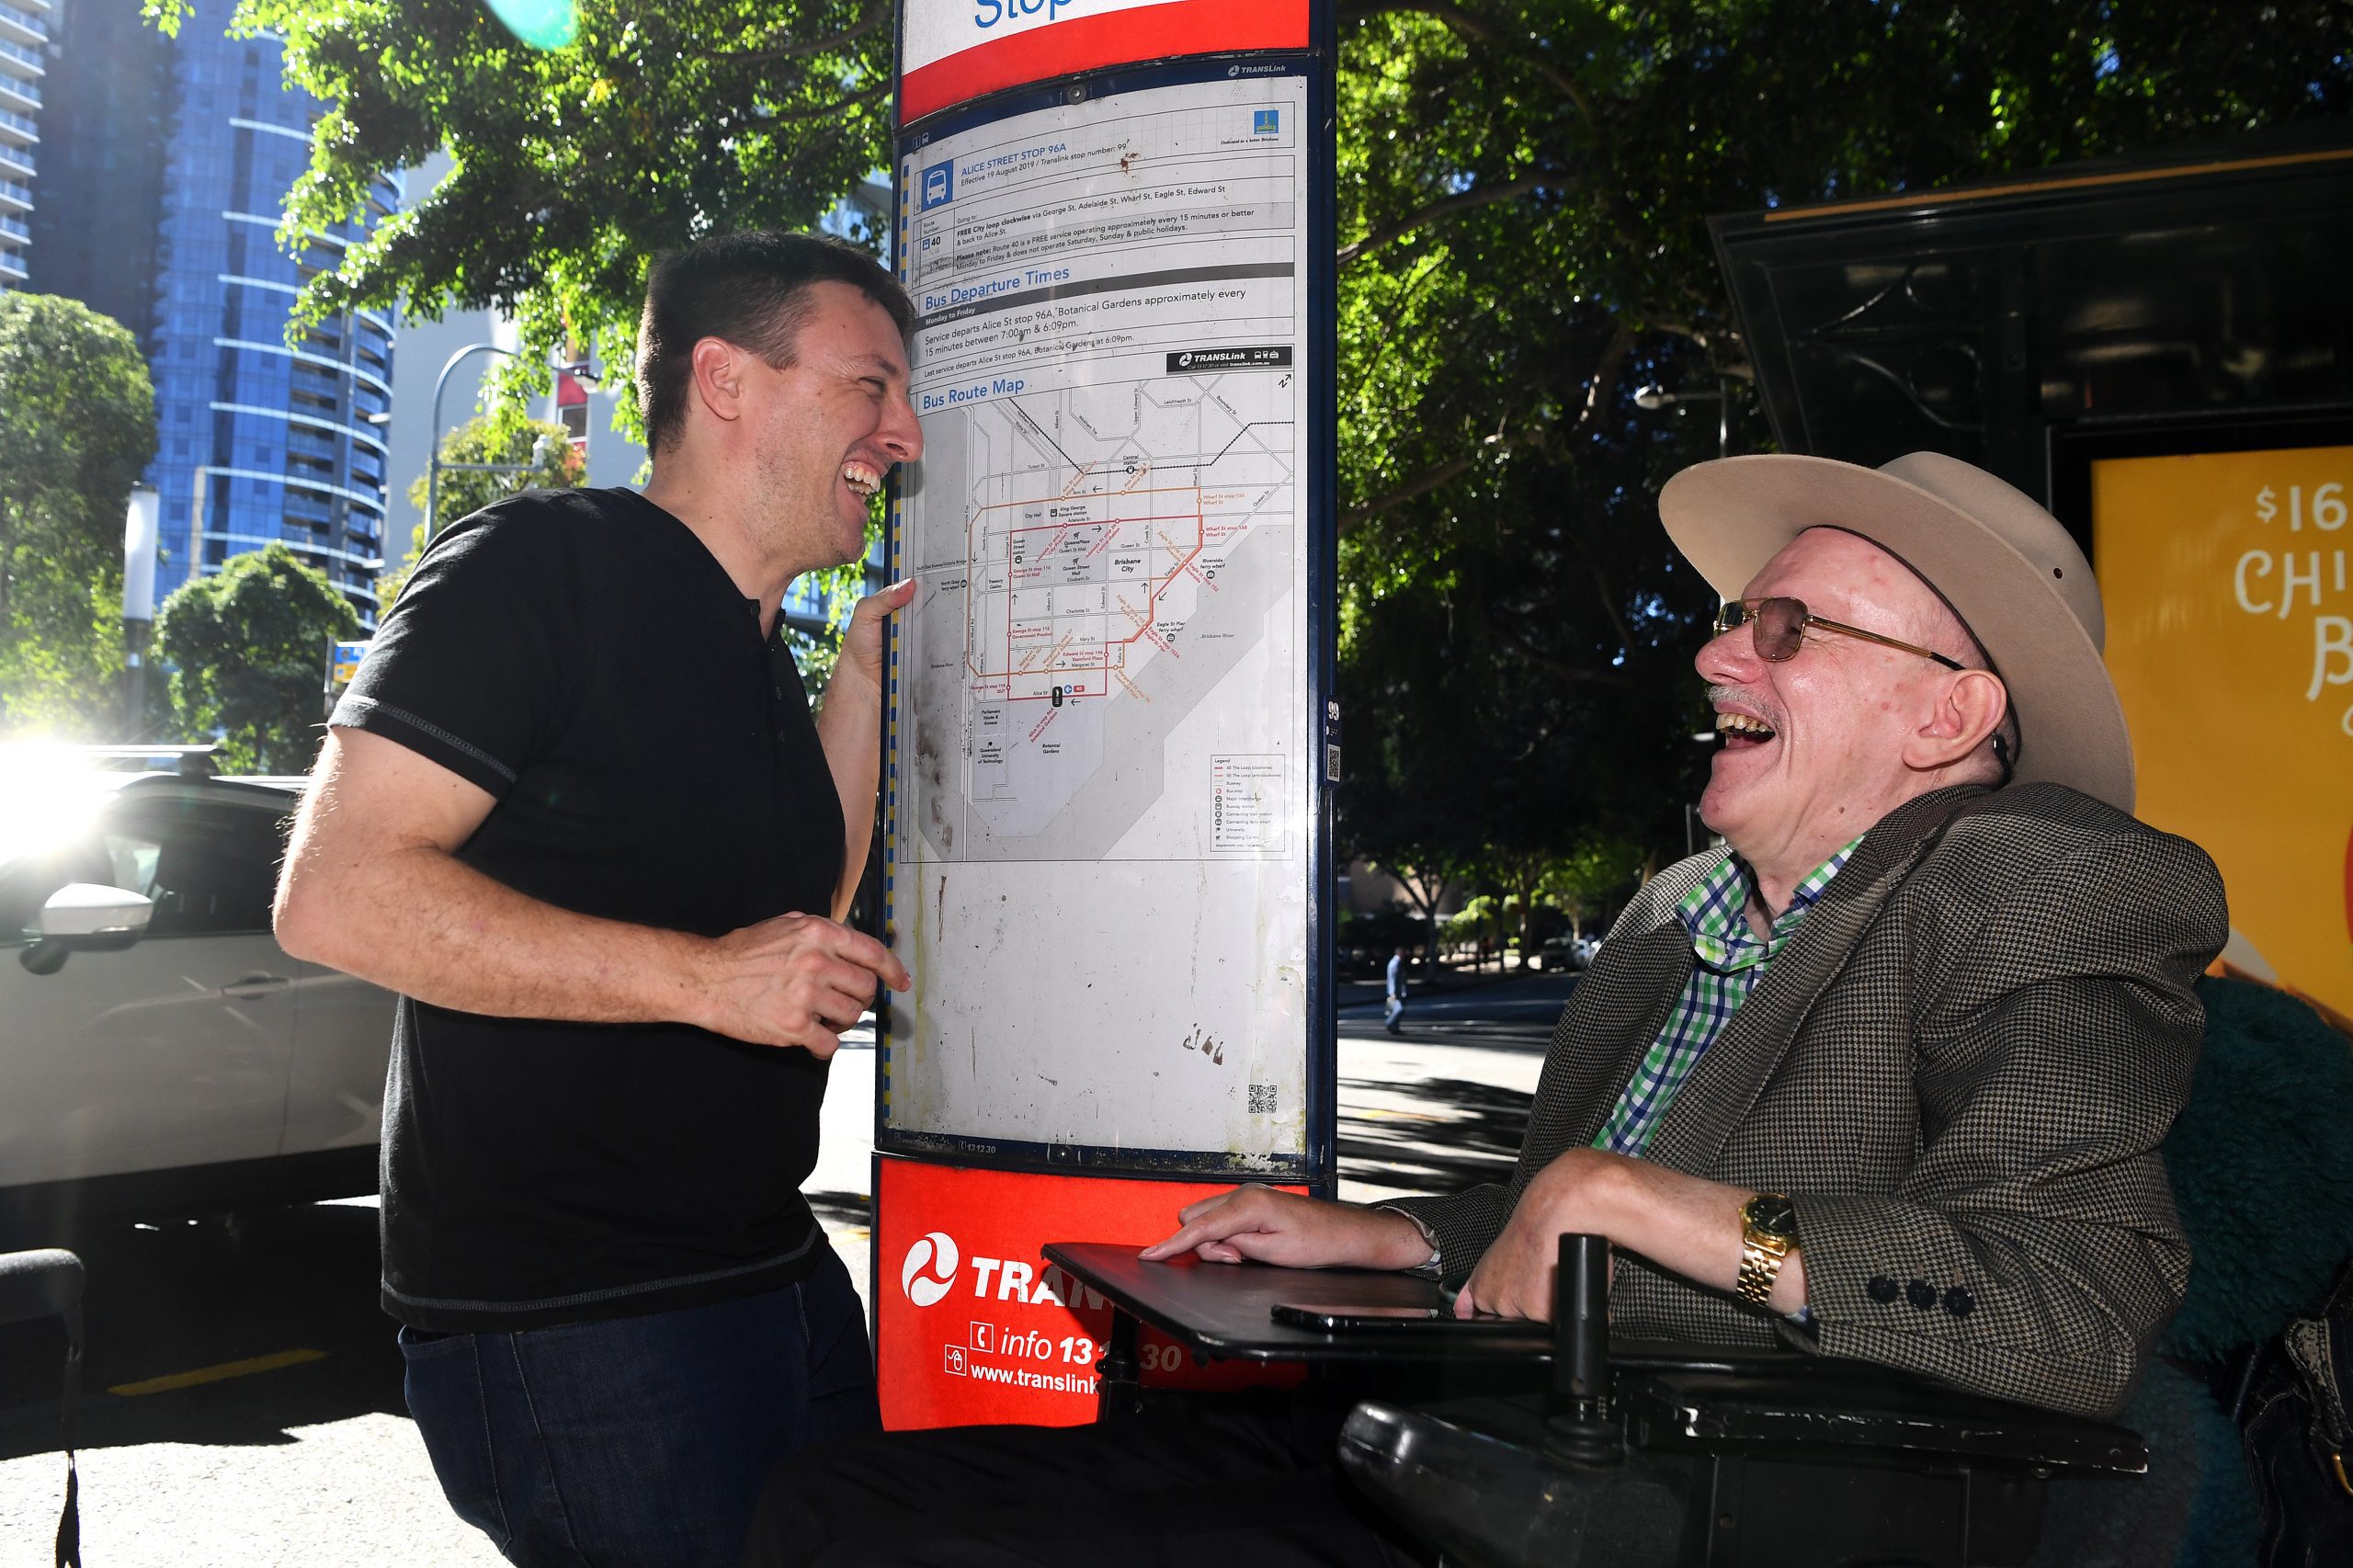 An elder man in a wheelchair speaks with a young man who is pointing at a sign with bus routes.